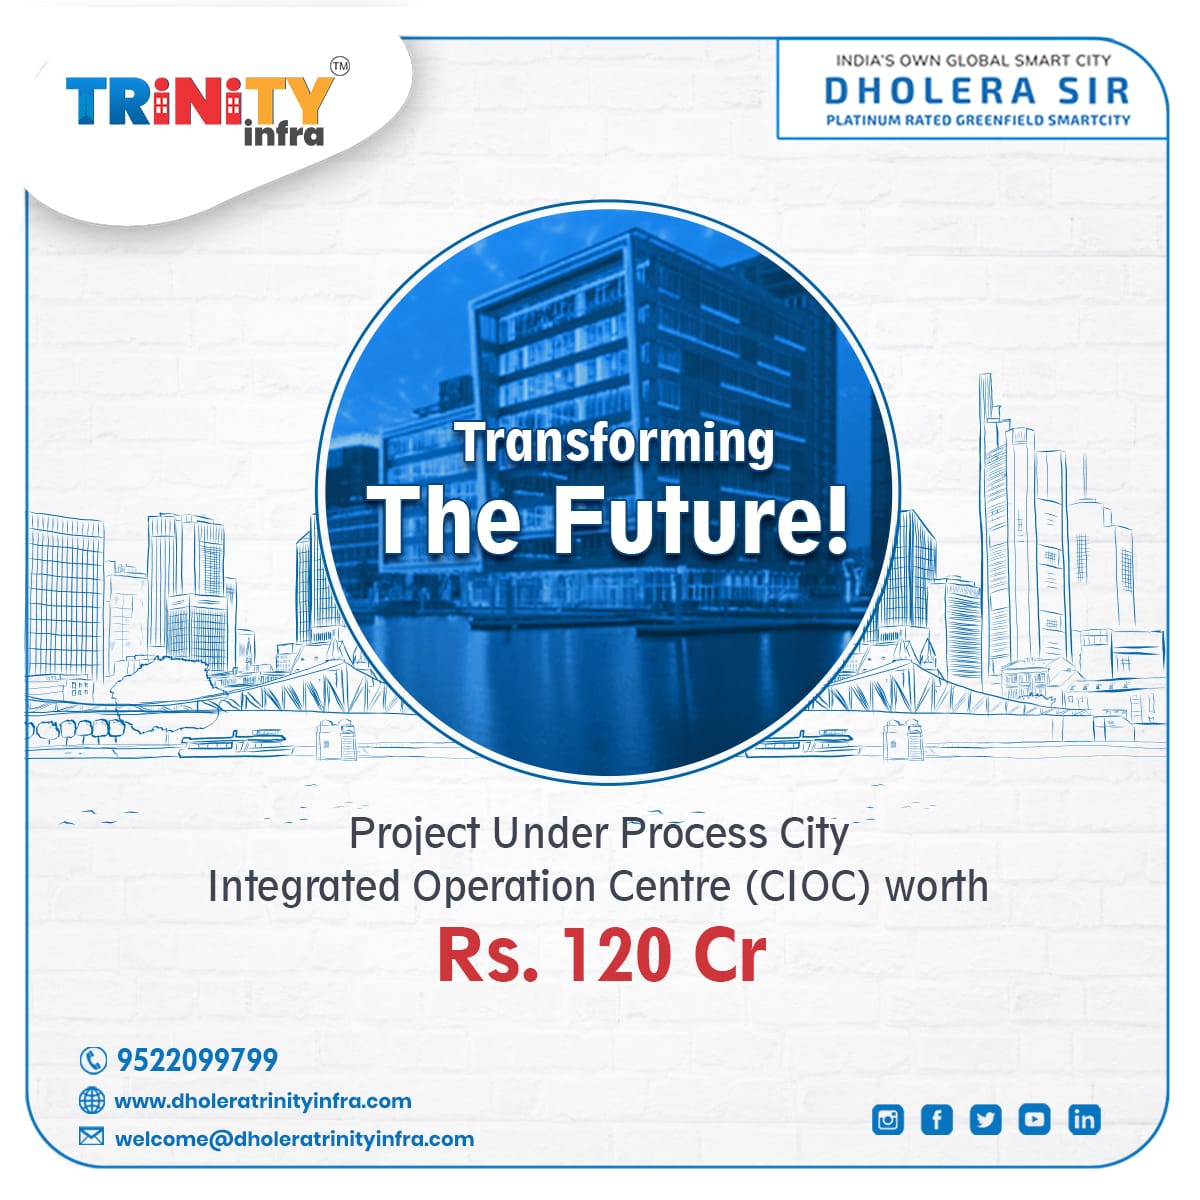 Transforming the future! 🚀
Working on the City Integrated Operation Centre (CIOC) project, a game-changer worth 120 Crores.
#DholeraSir #SmartCity #SustainableLiving #BookNow #RealEstateInvestment #Quality #Sustainability #SmartInvesting #dholera #trinityinfra #dholeraproject